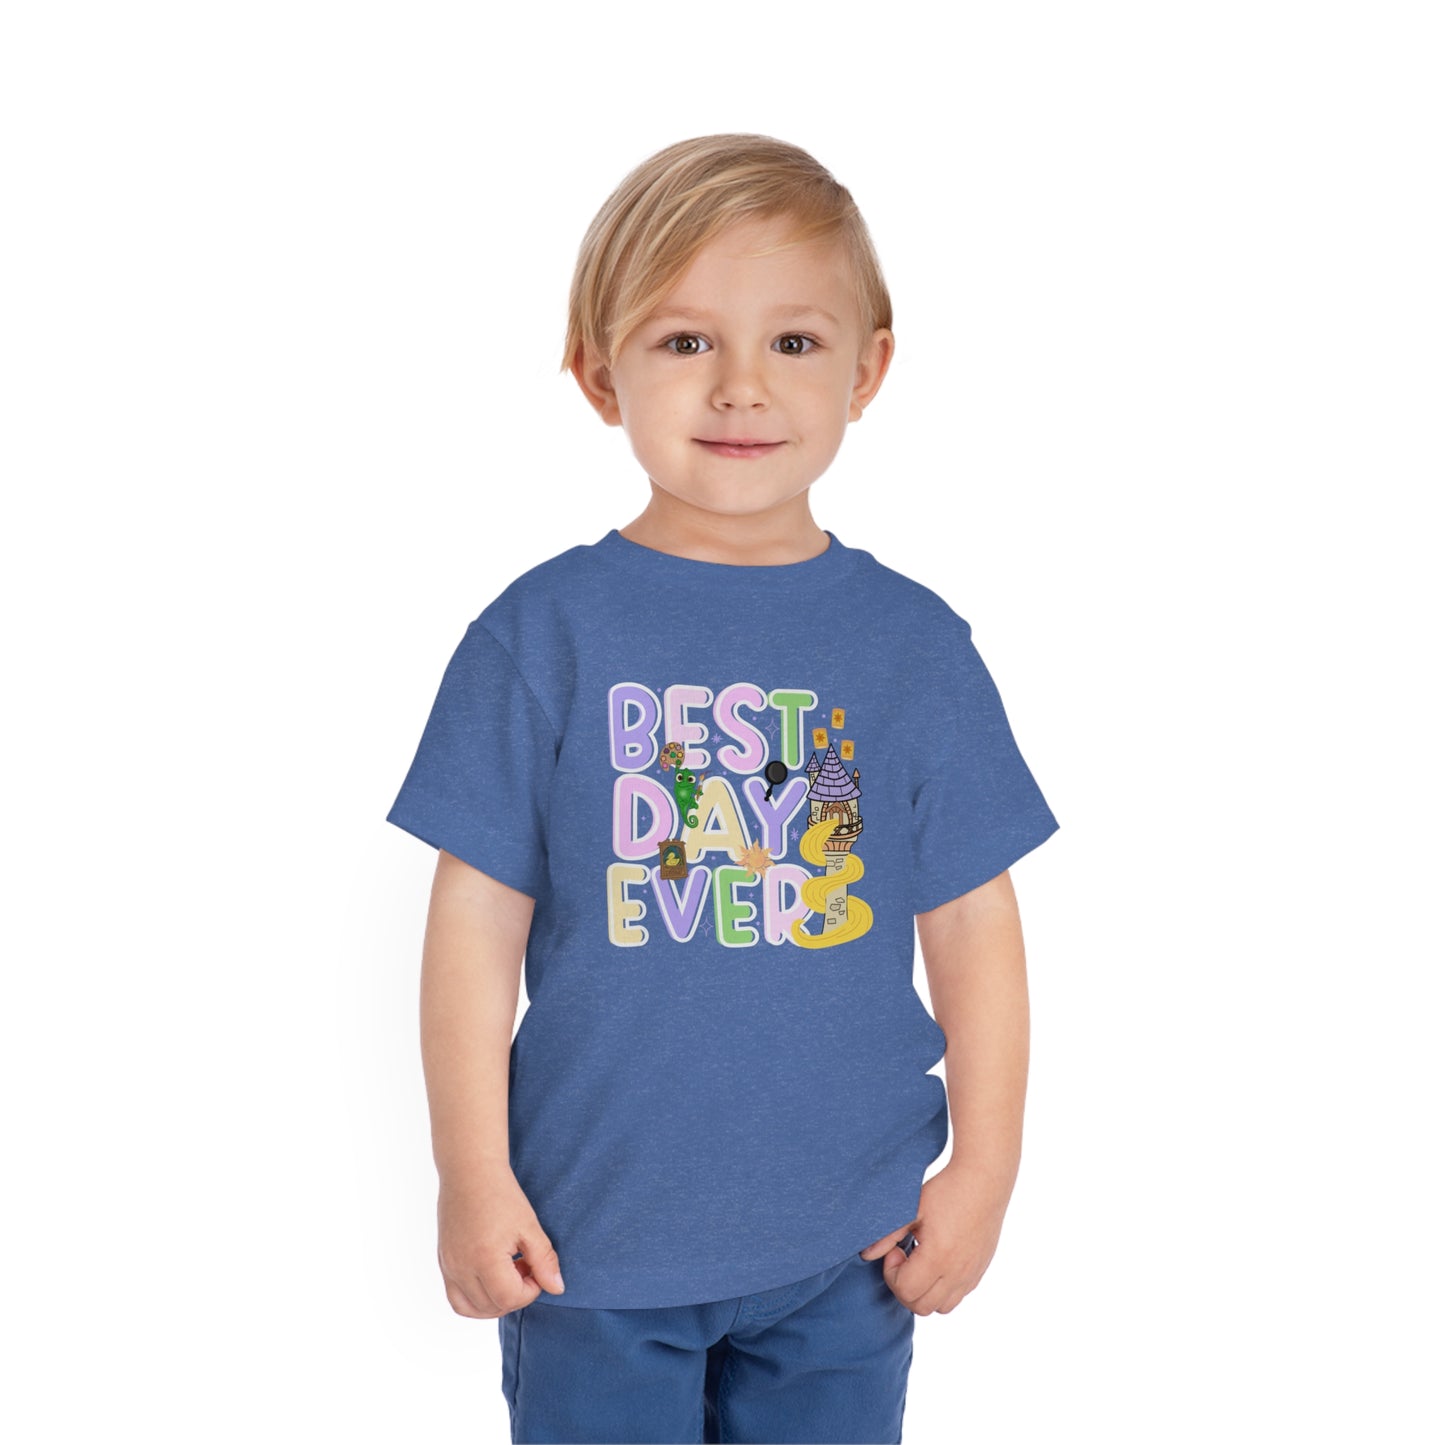 Best Day Ever Toddler Short Sleeve Tee